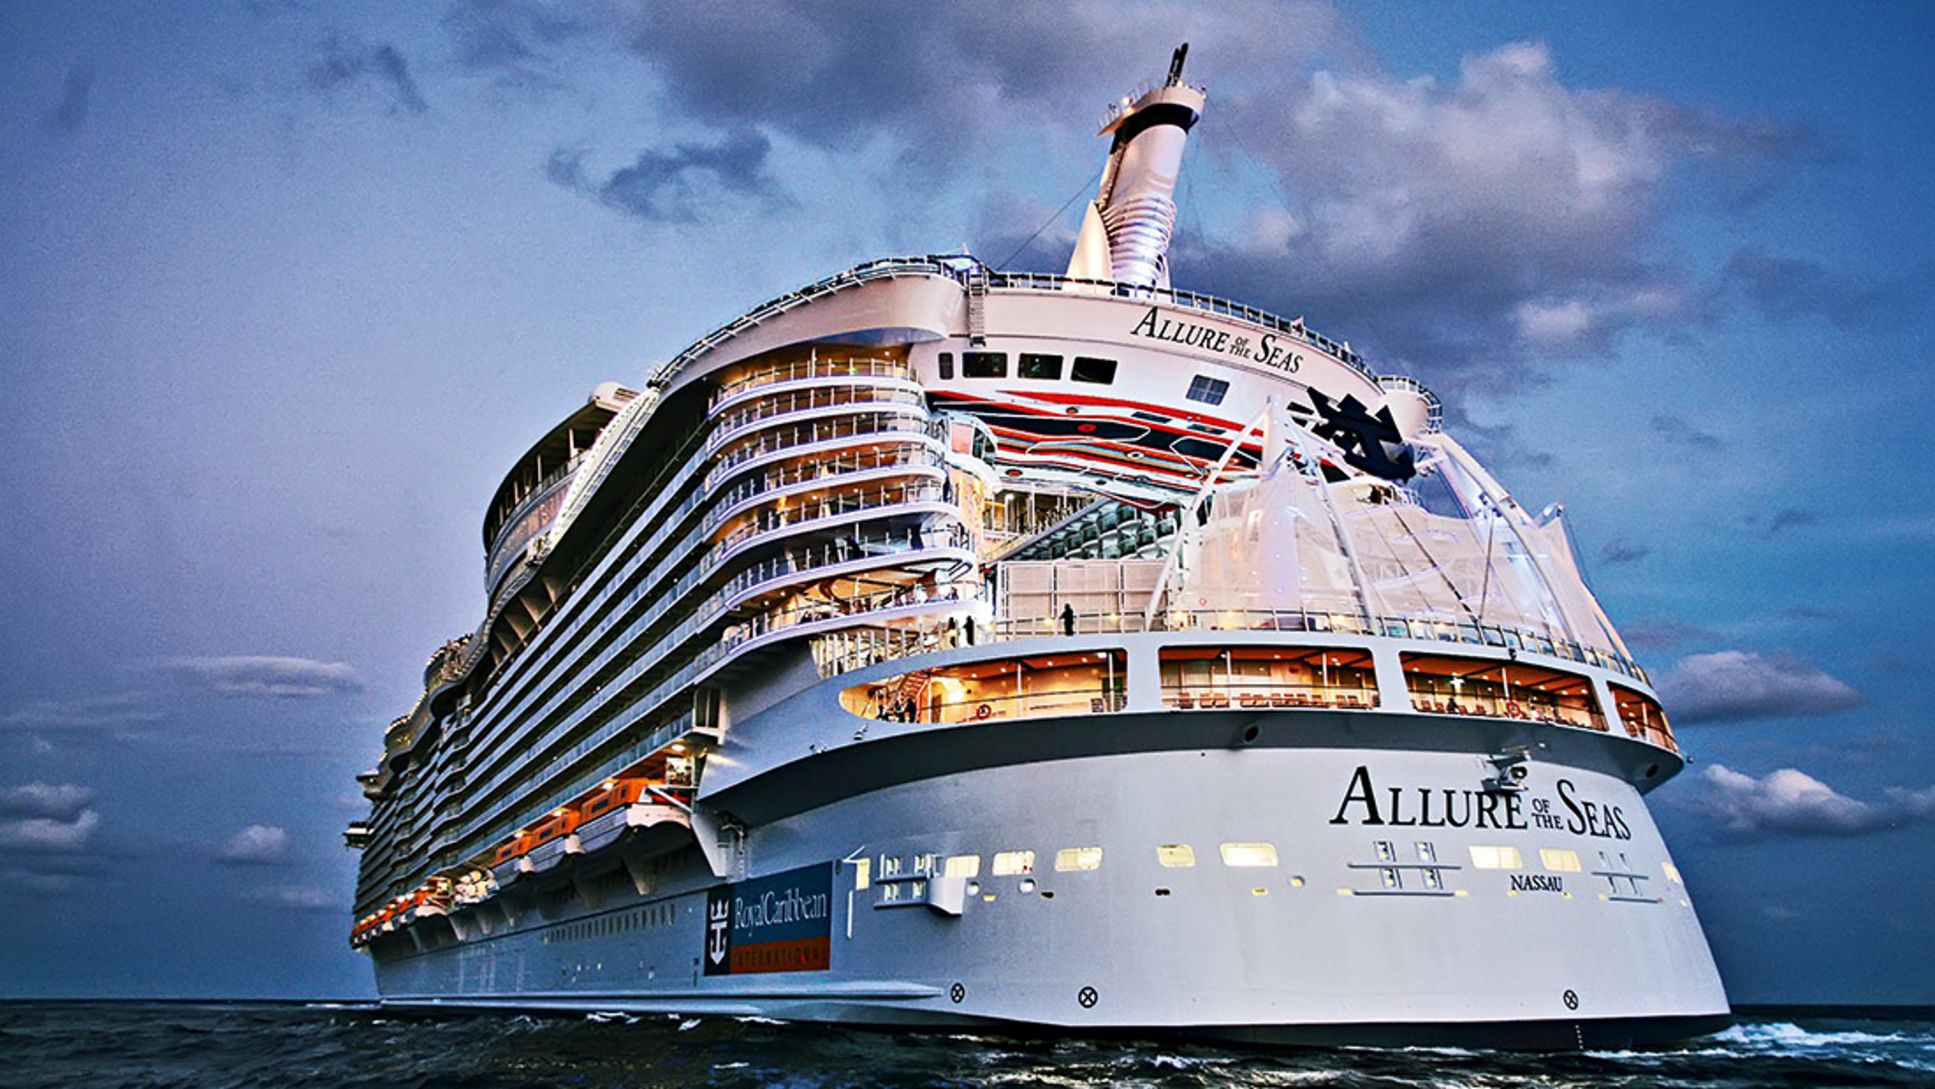 The “Allure of the Seas” (Photo: Royal Caribbean)